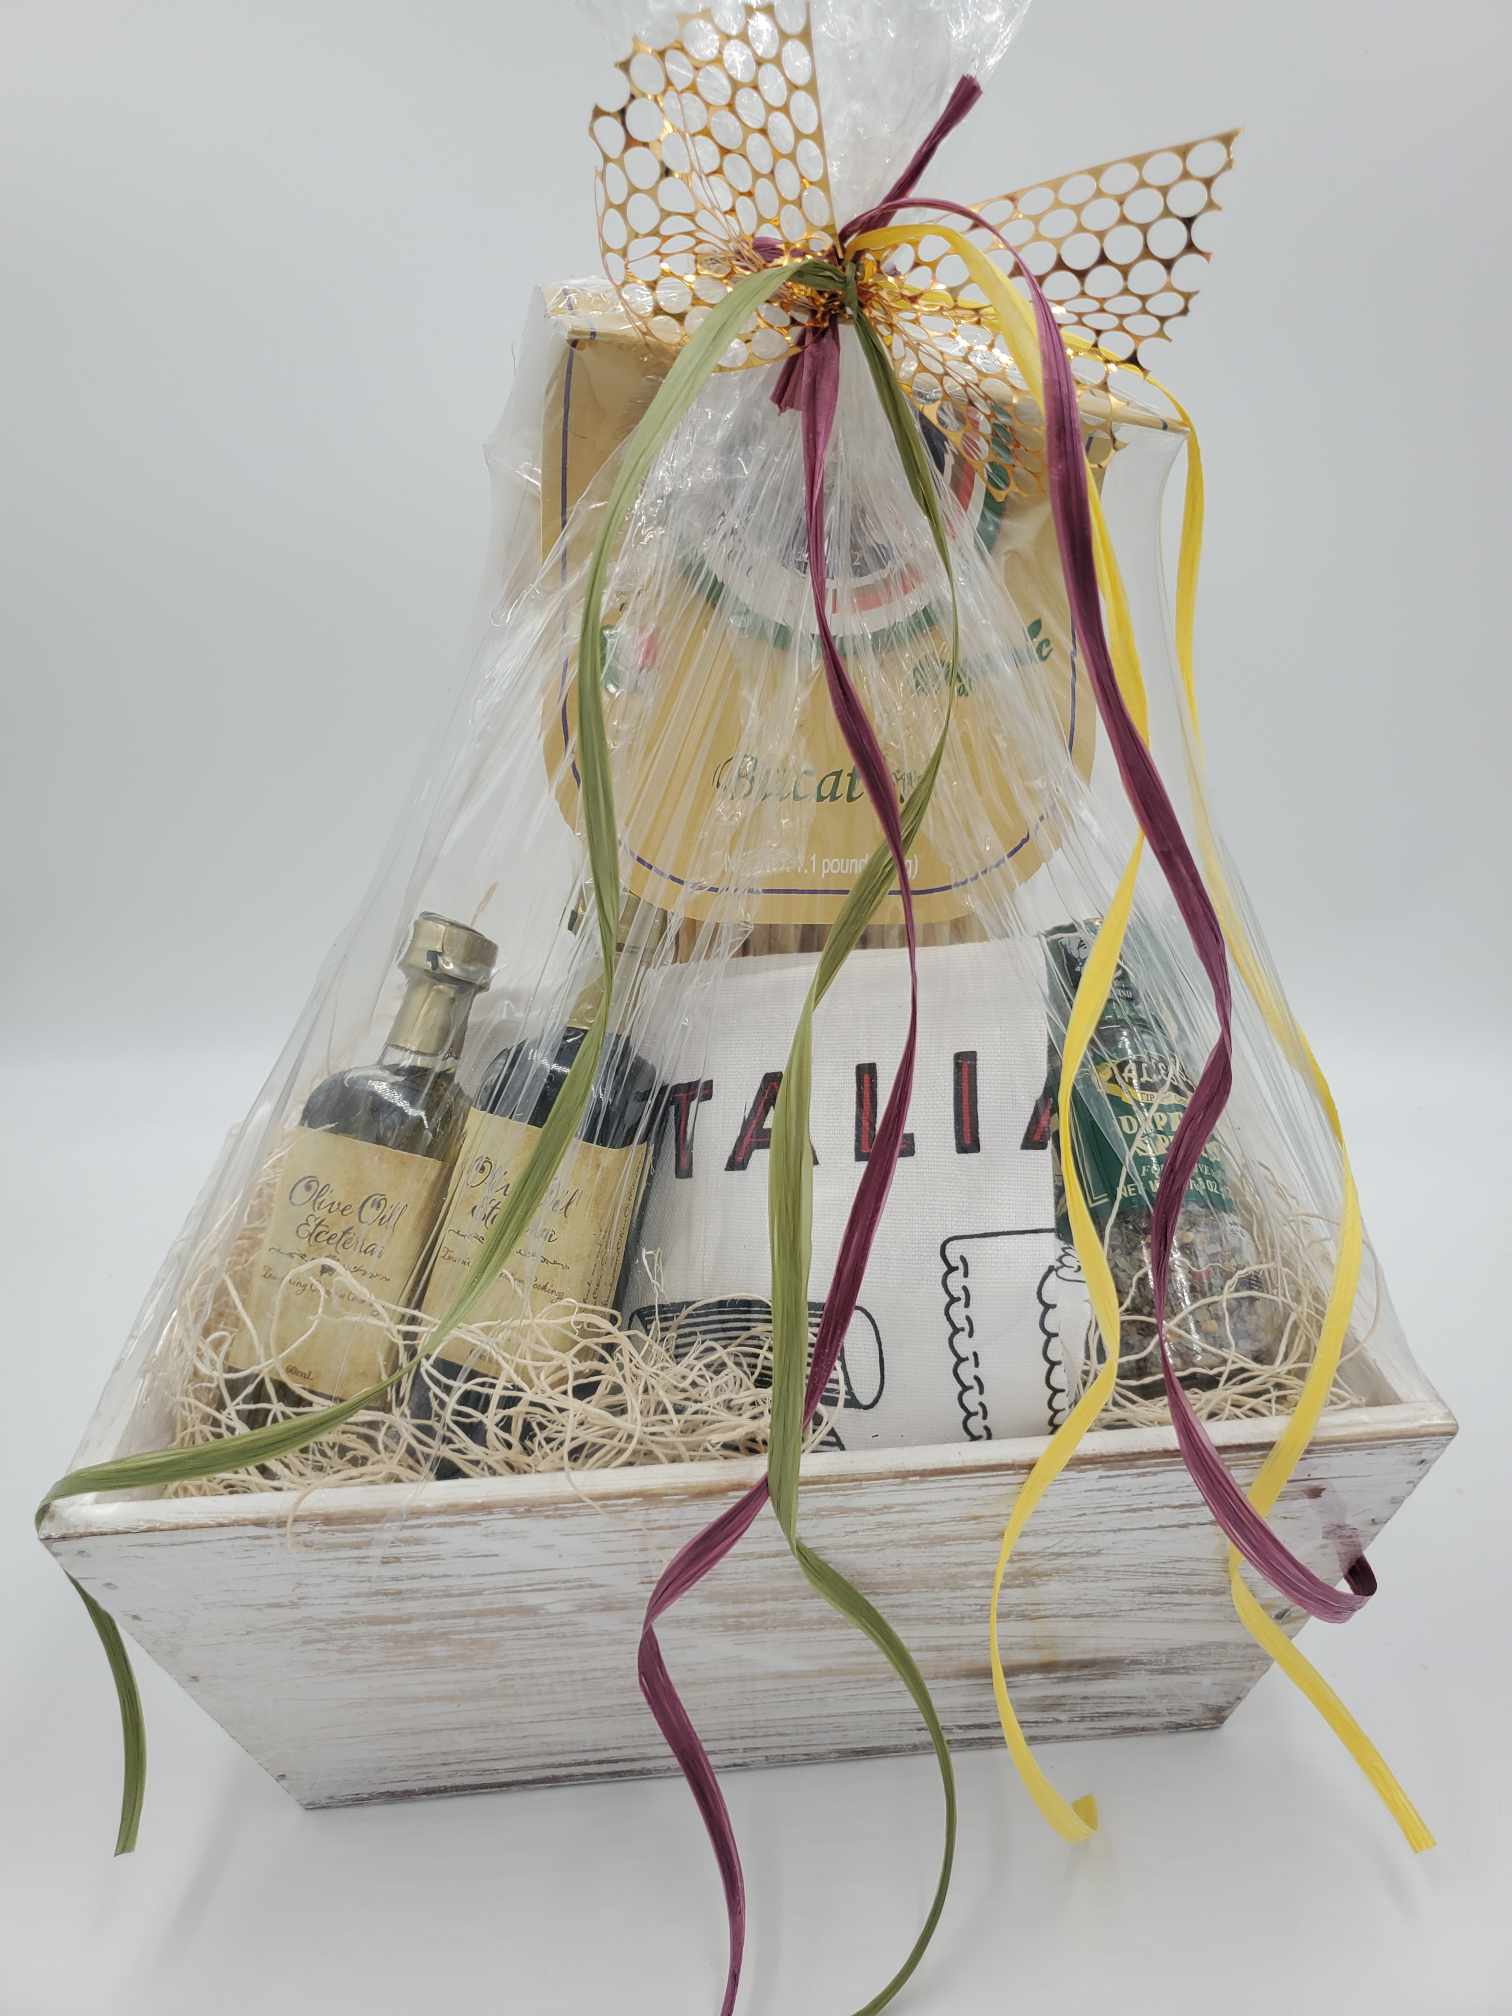 Italian Themed Basket with Olive oil and balsamic vinegar, pasta, Dipping spice and pasta tea towel from Stonewall Kitchen 